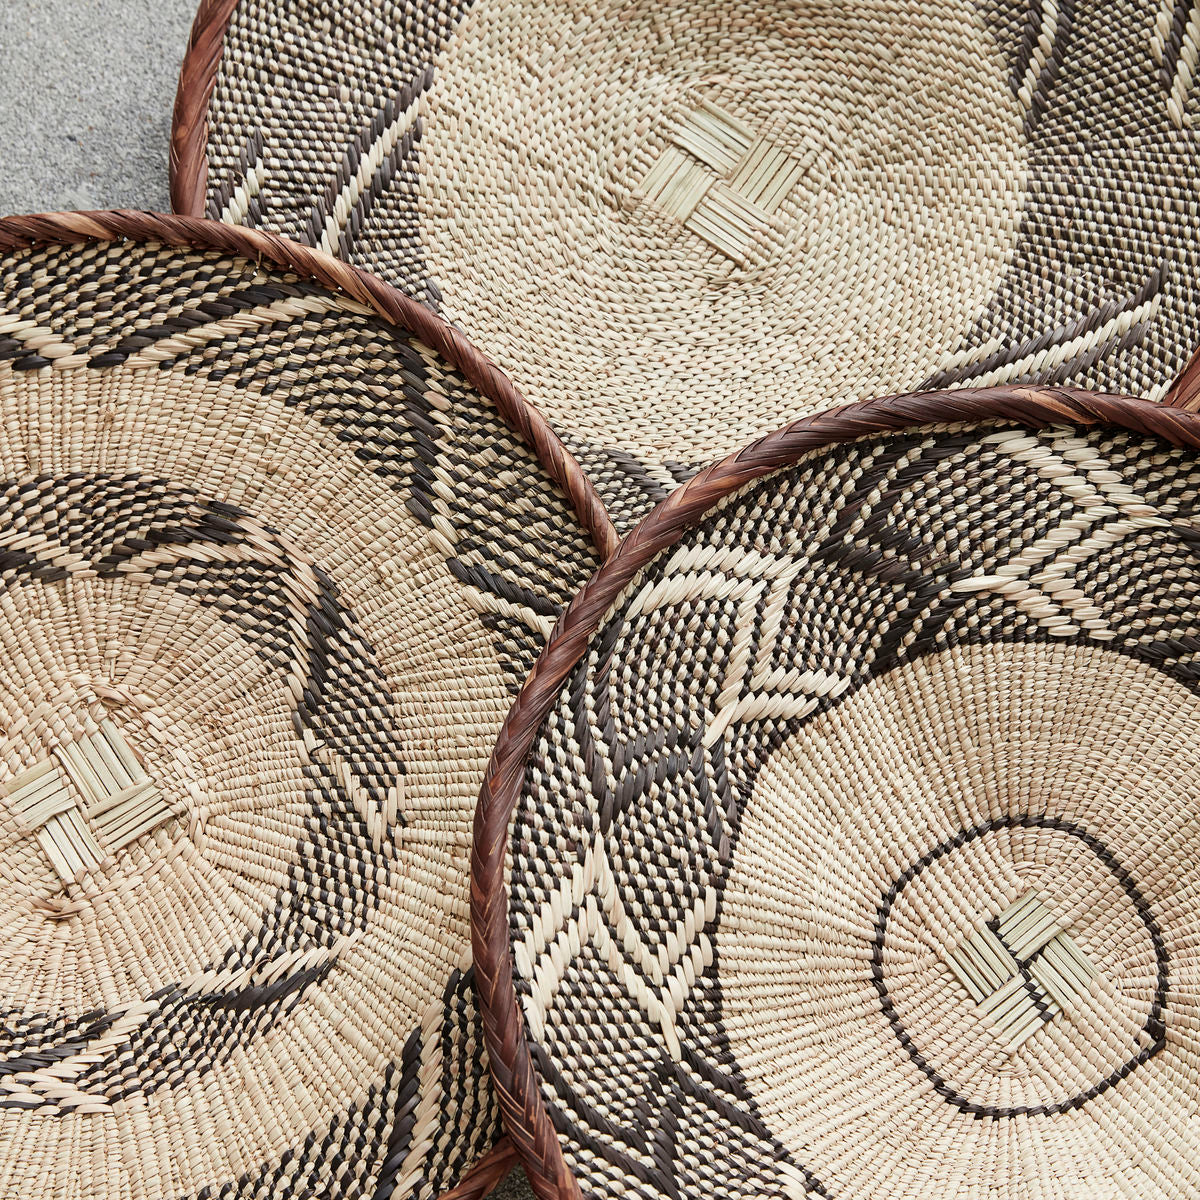 TONGA baskets - size and pattern will vary